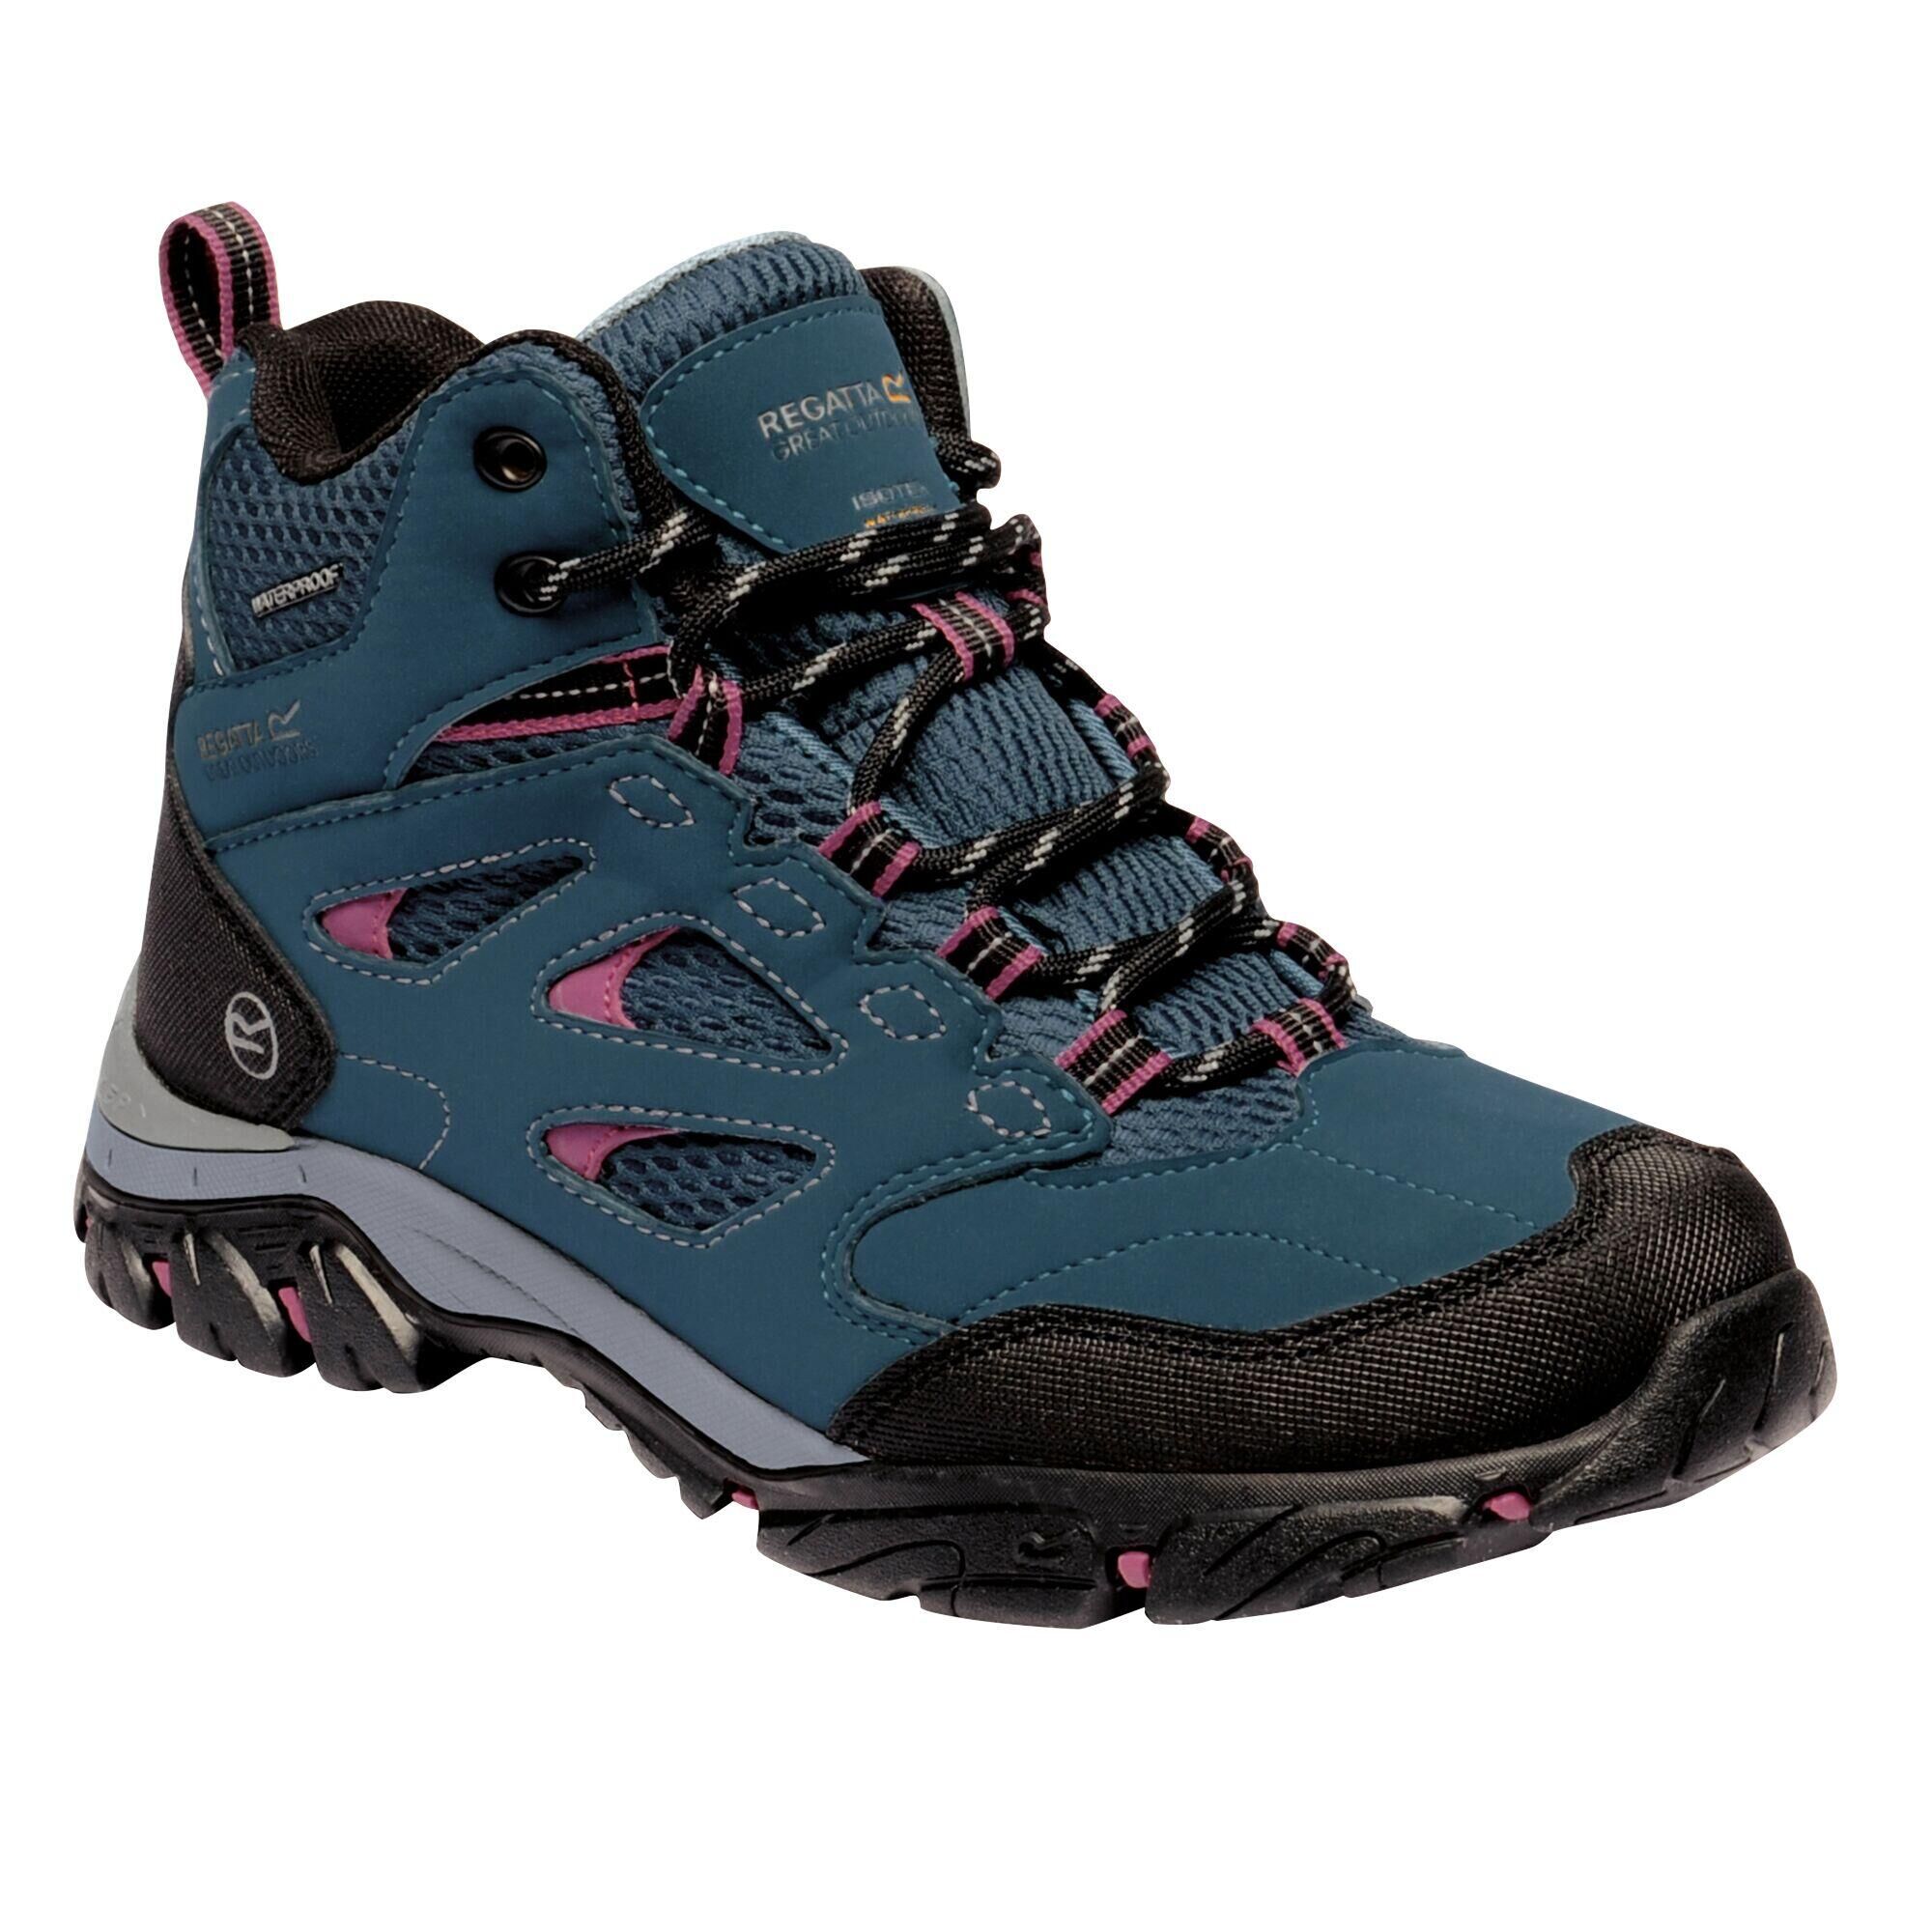 REGATTA Lady Holcombe IEP Mid Women's Hiking Boots - Moroccan Blue / Red